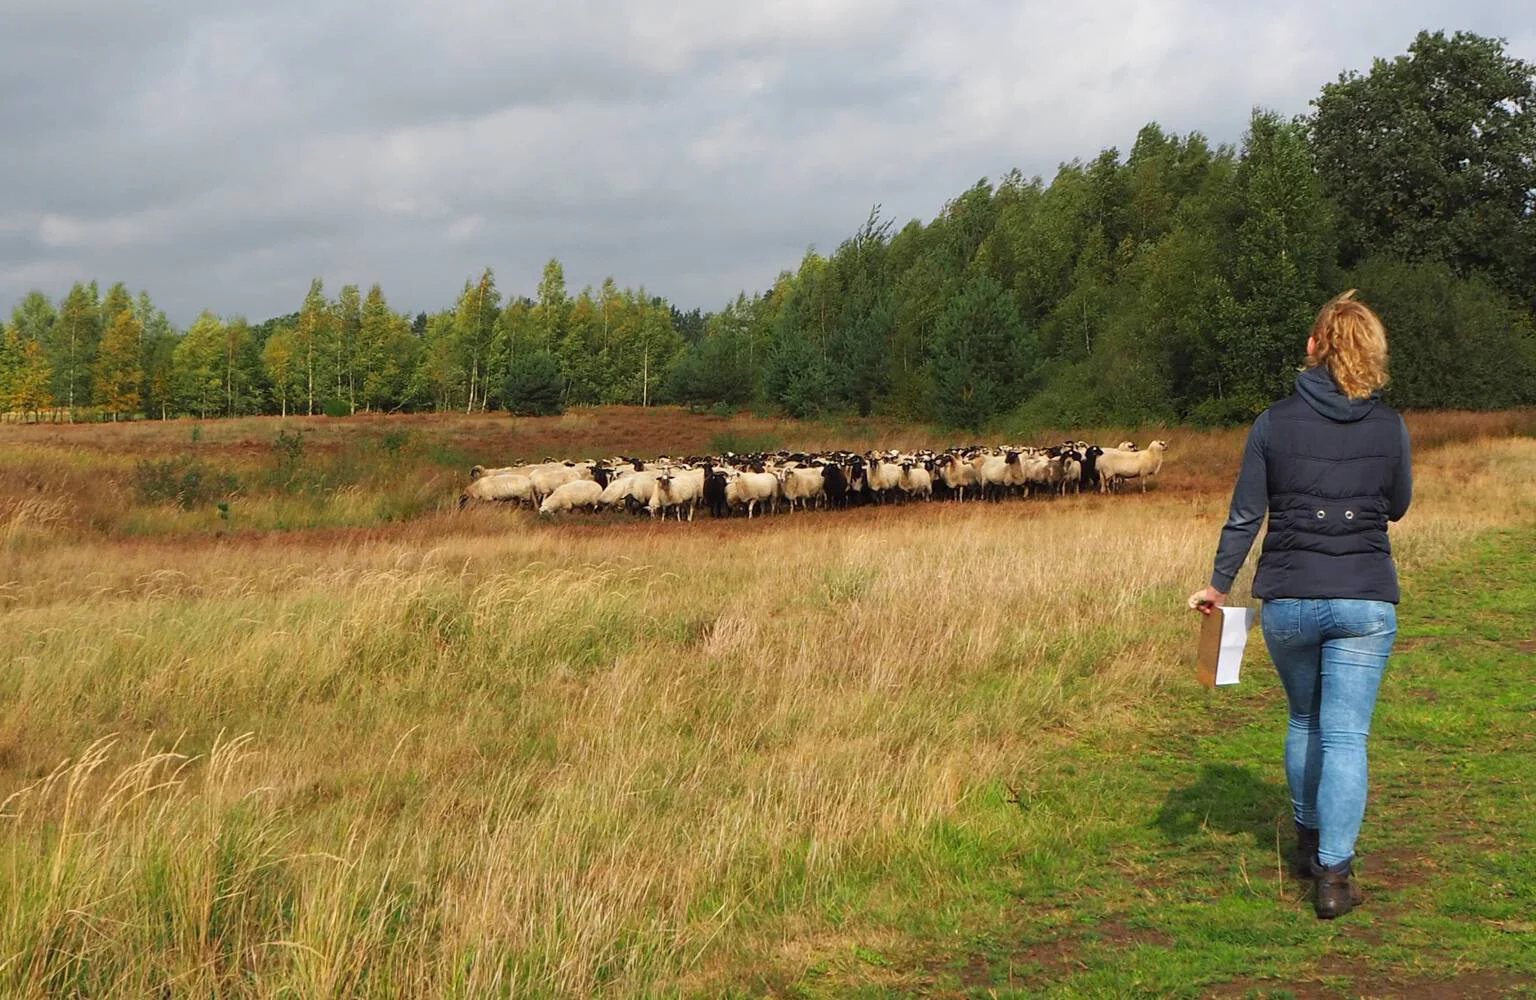 Active excursions in Drenthe for all ages